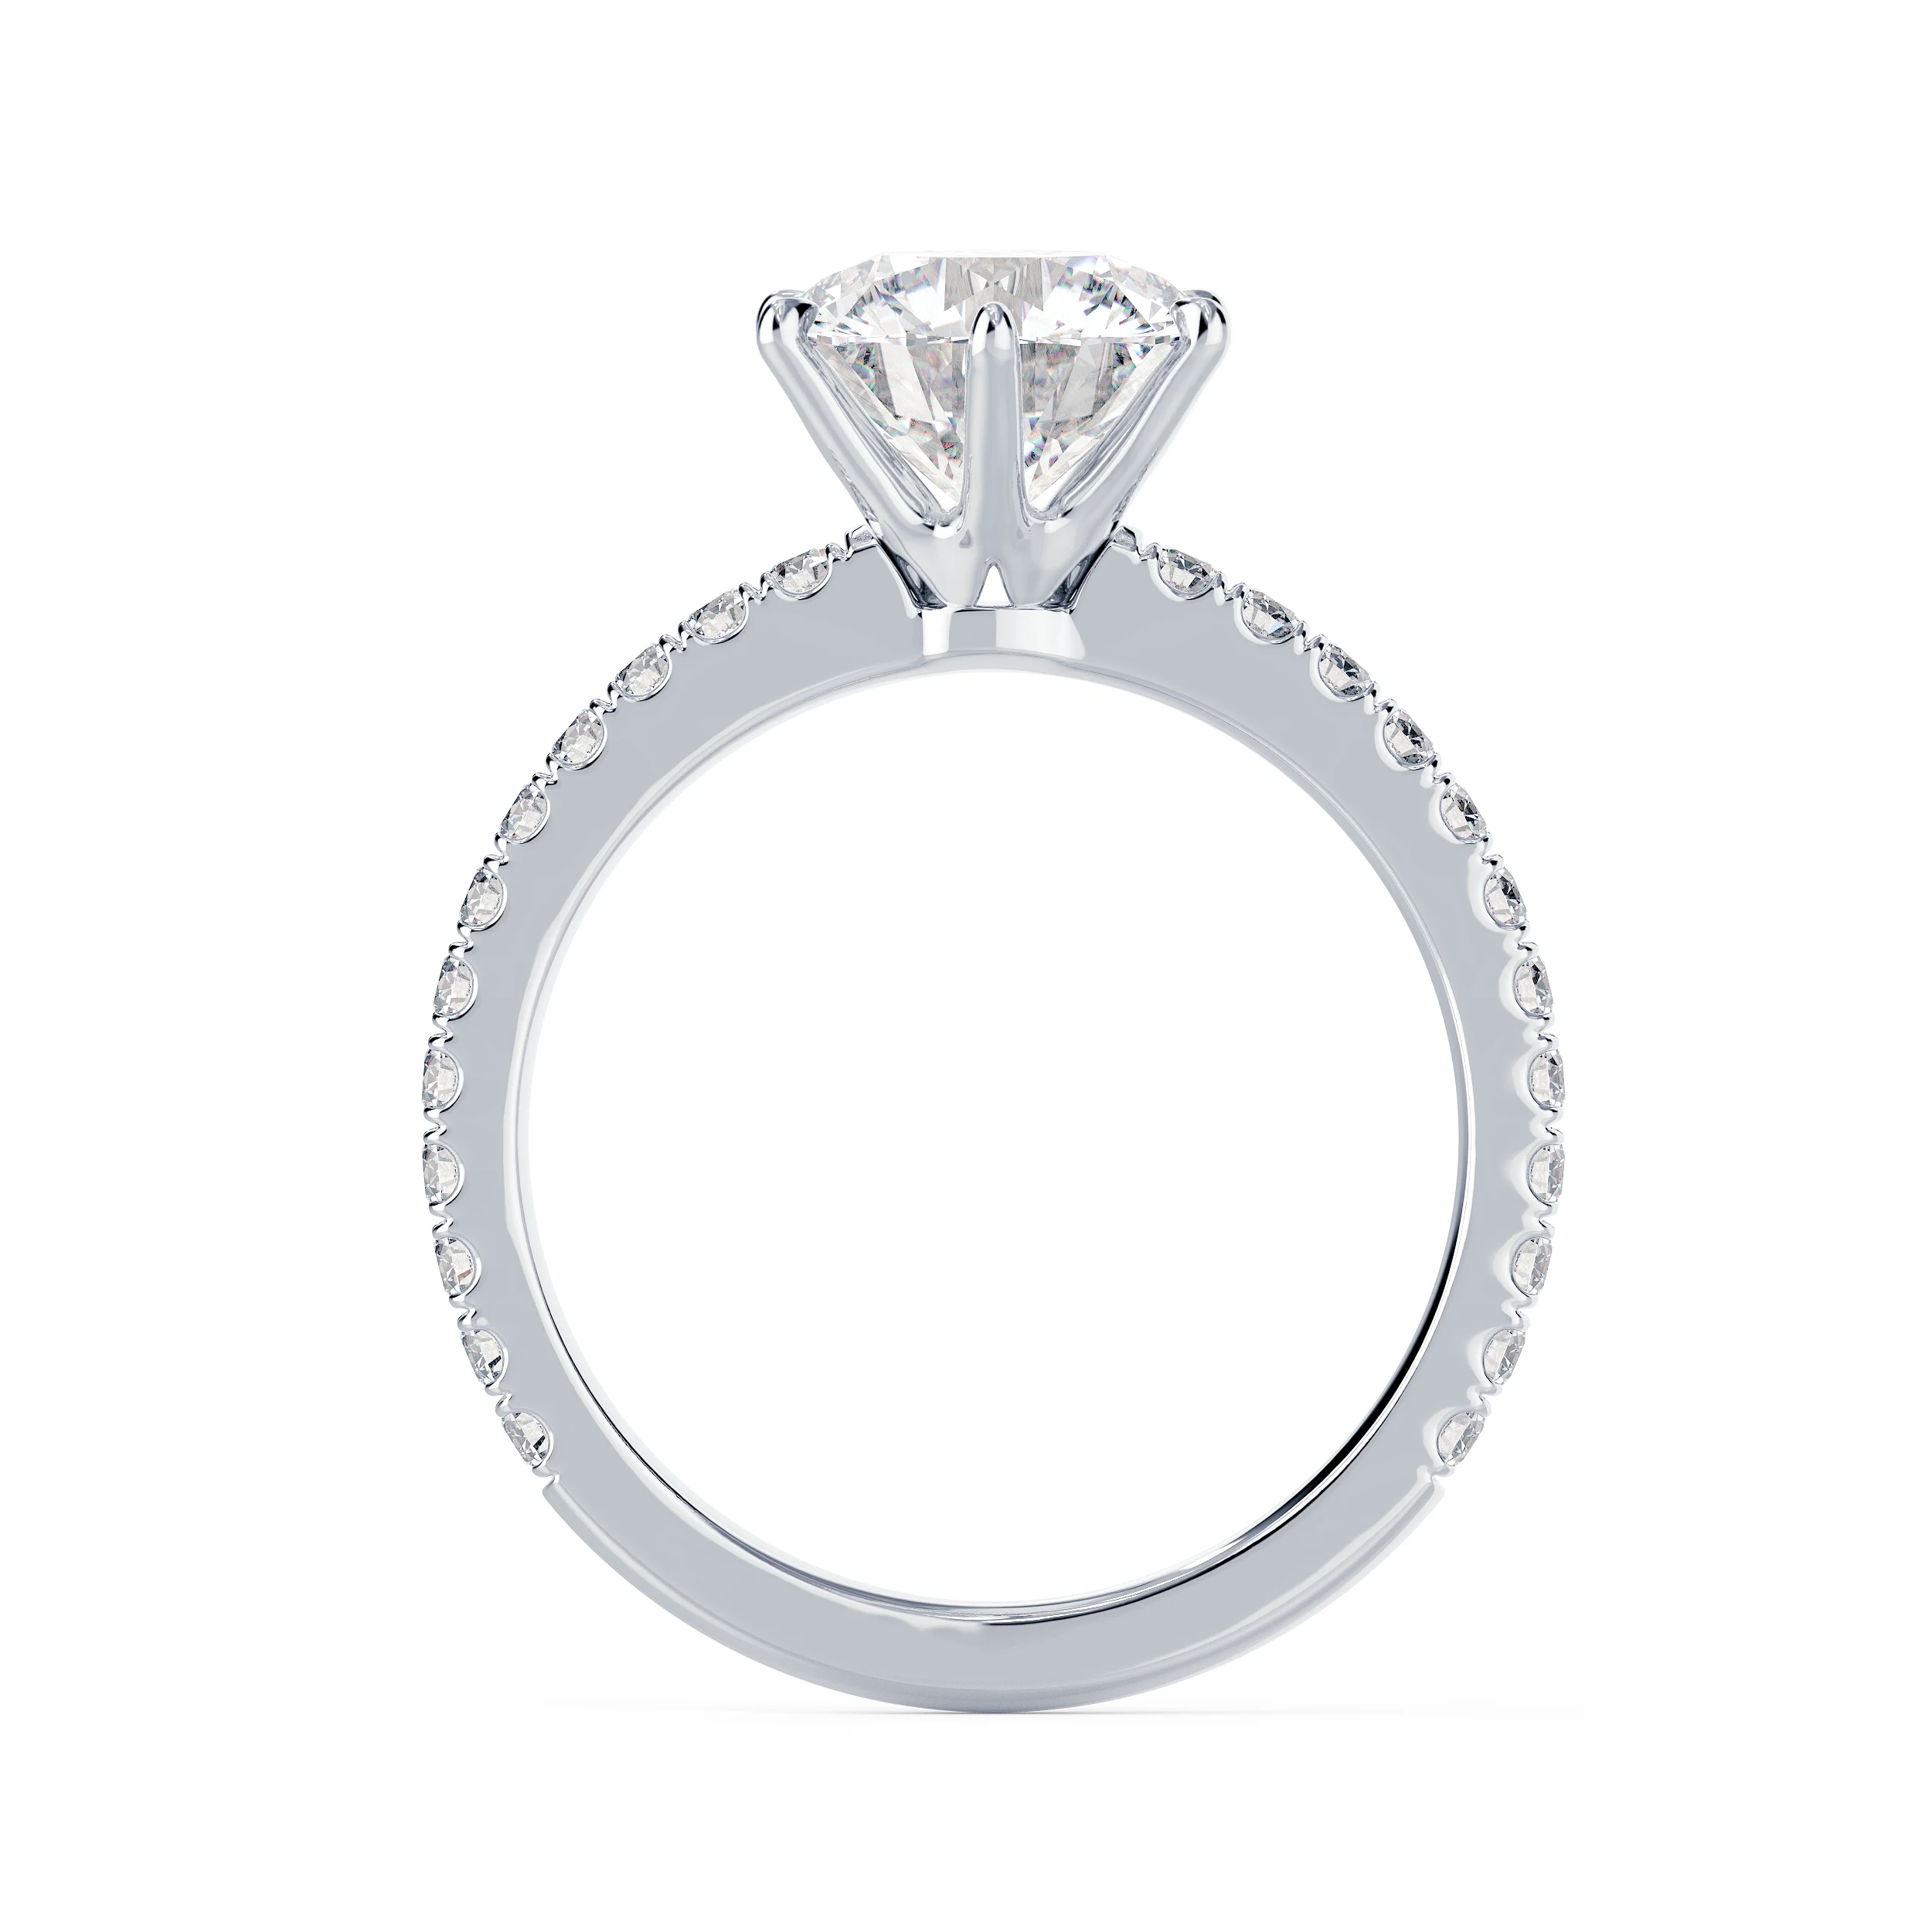 White Gold Round Six Prong Pavé Diamond Engagement Ring featuring High Quality Diamonds (Profile View)